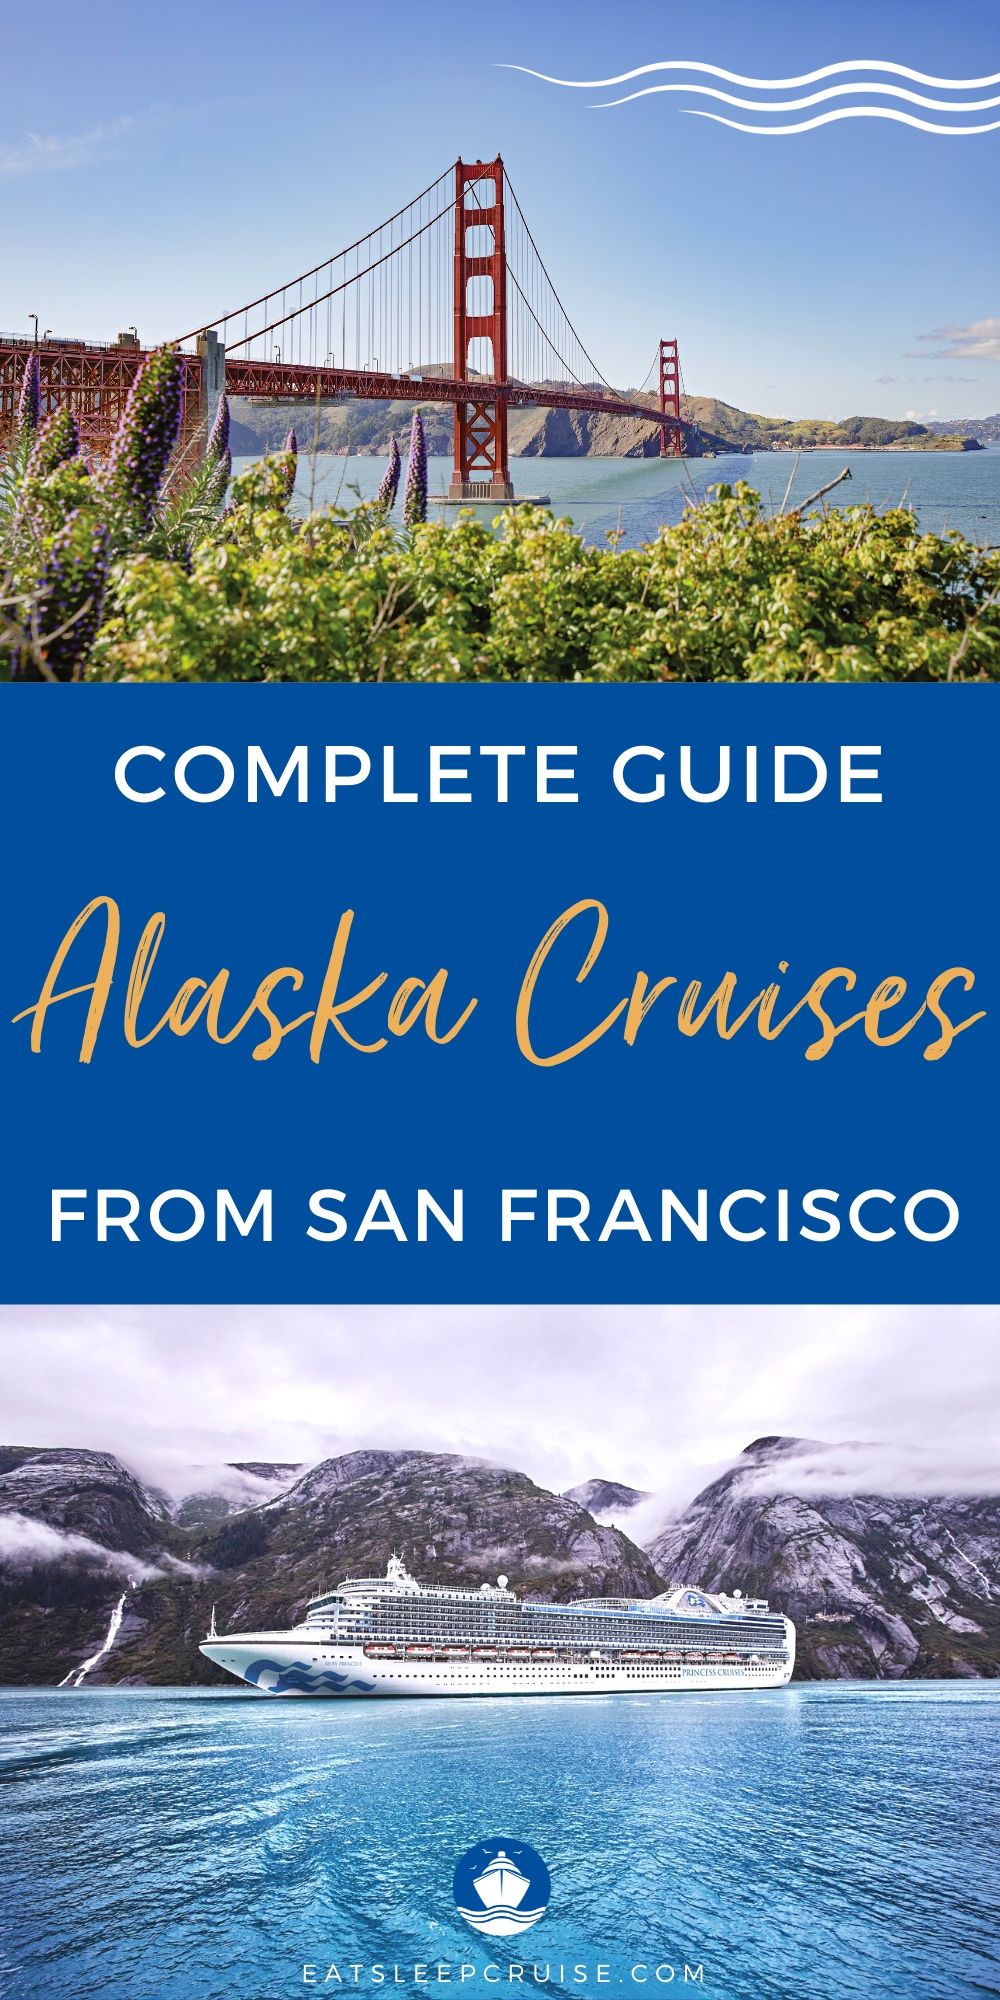 Complete Guide to Alaska Cruises From San Francisco